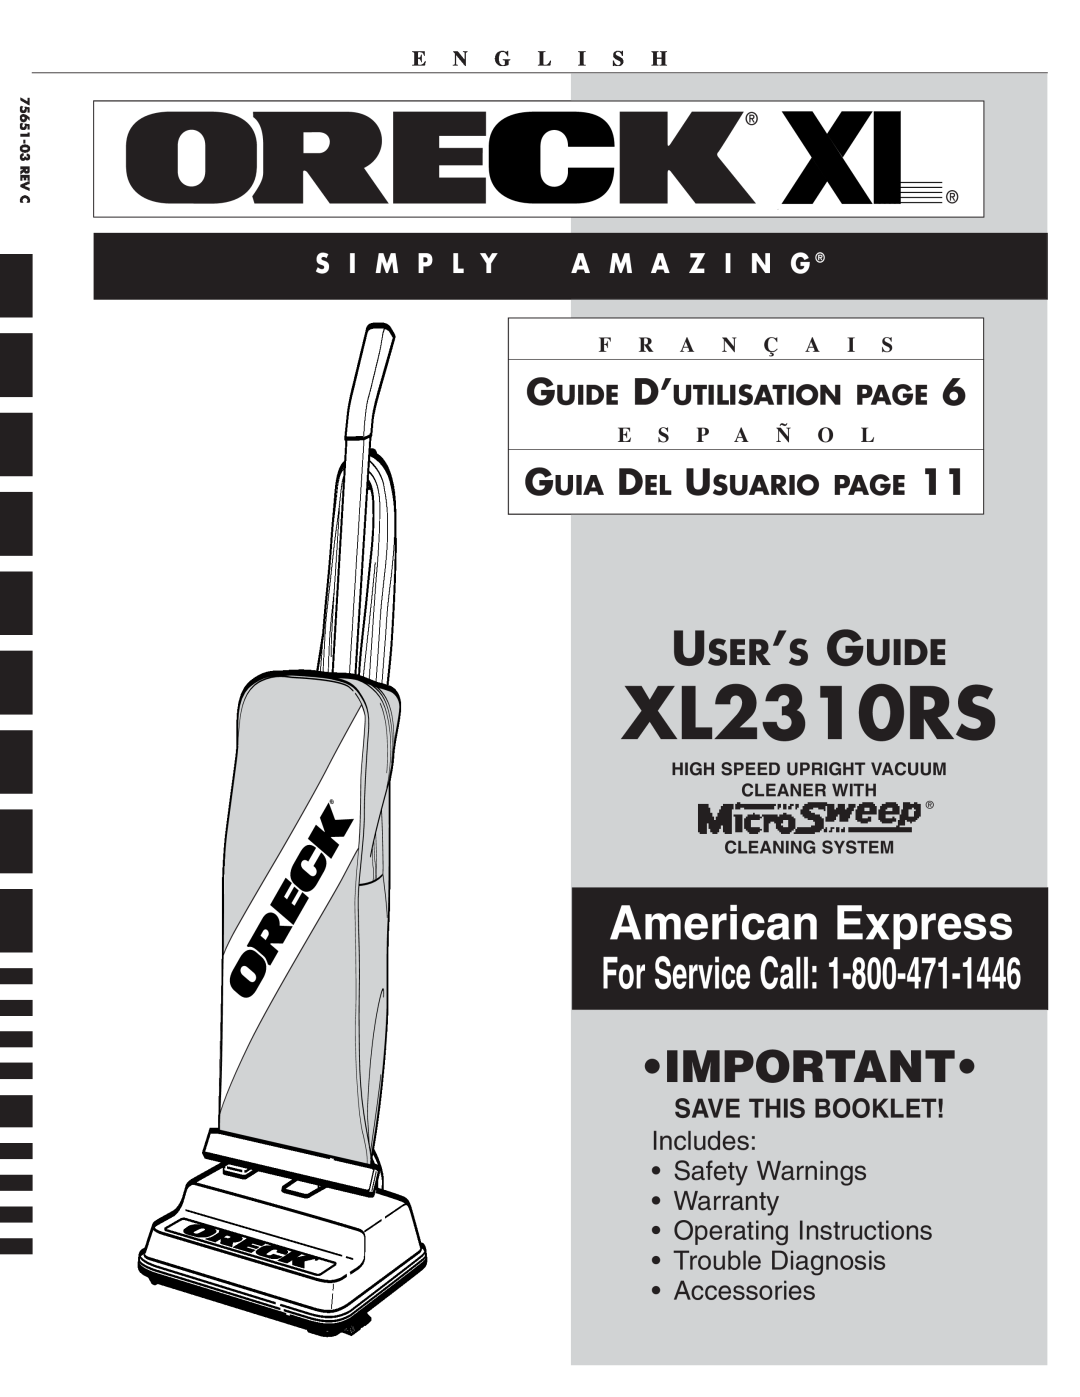 Oreck XL2310RS warranty Guide D’Utilisation Page, Guia Del Usuario Page, Save This Booklet, E N G L I S H, F R A N Ç A I S 